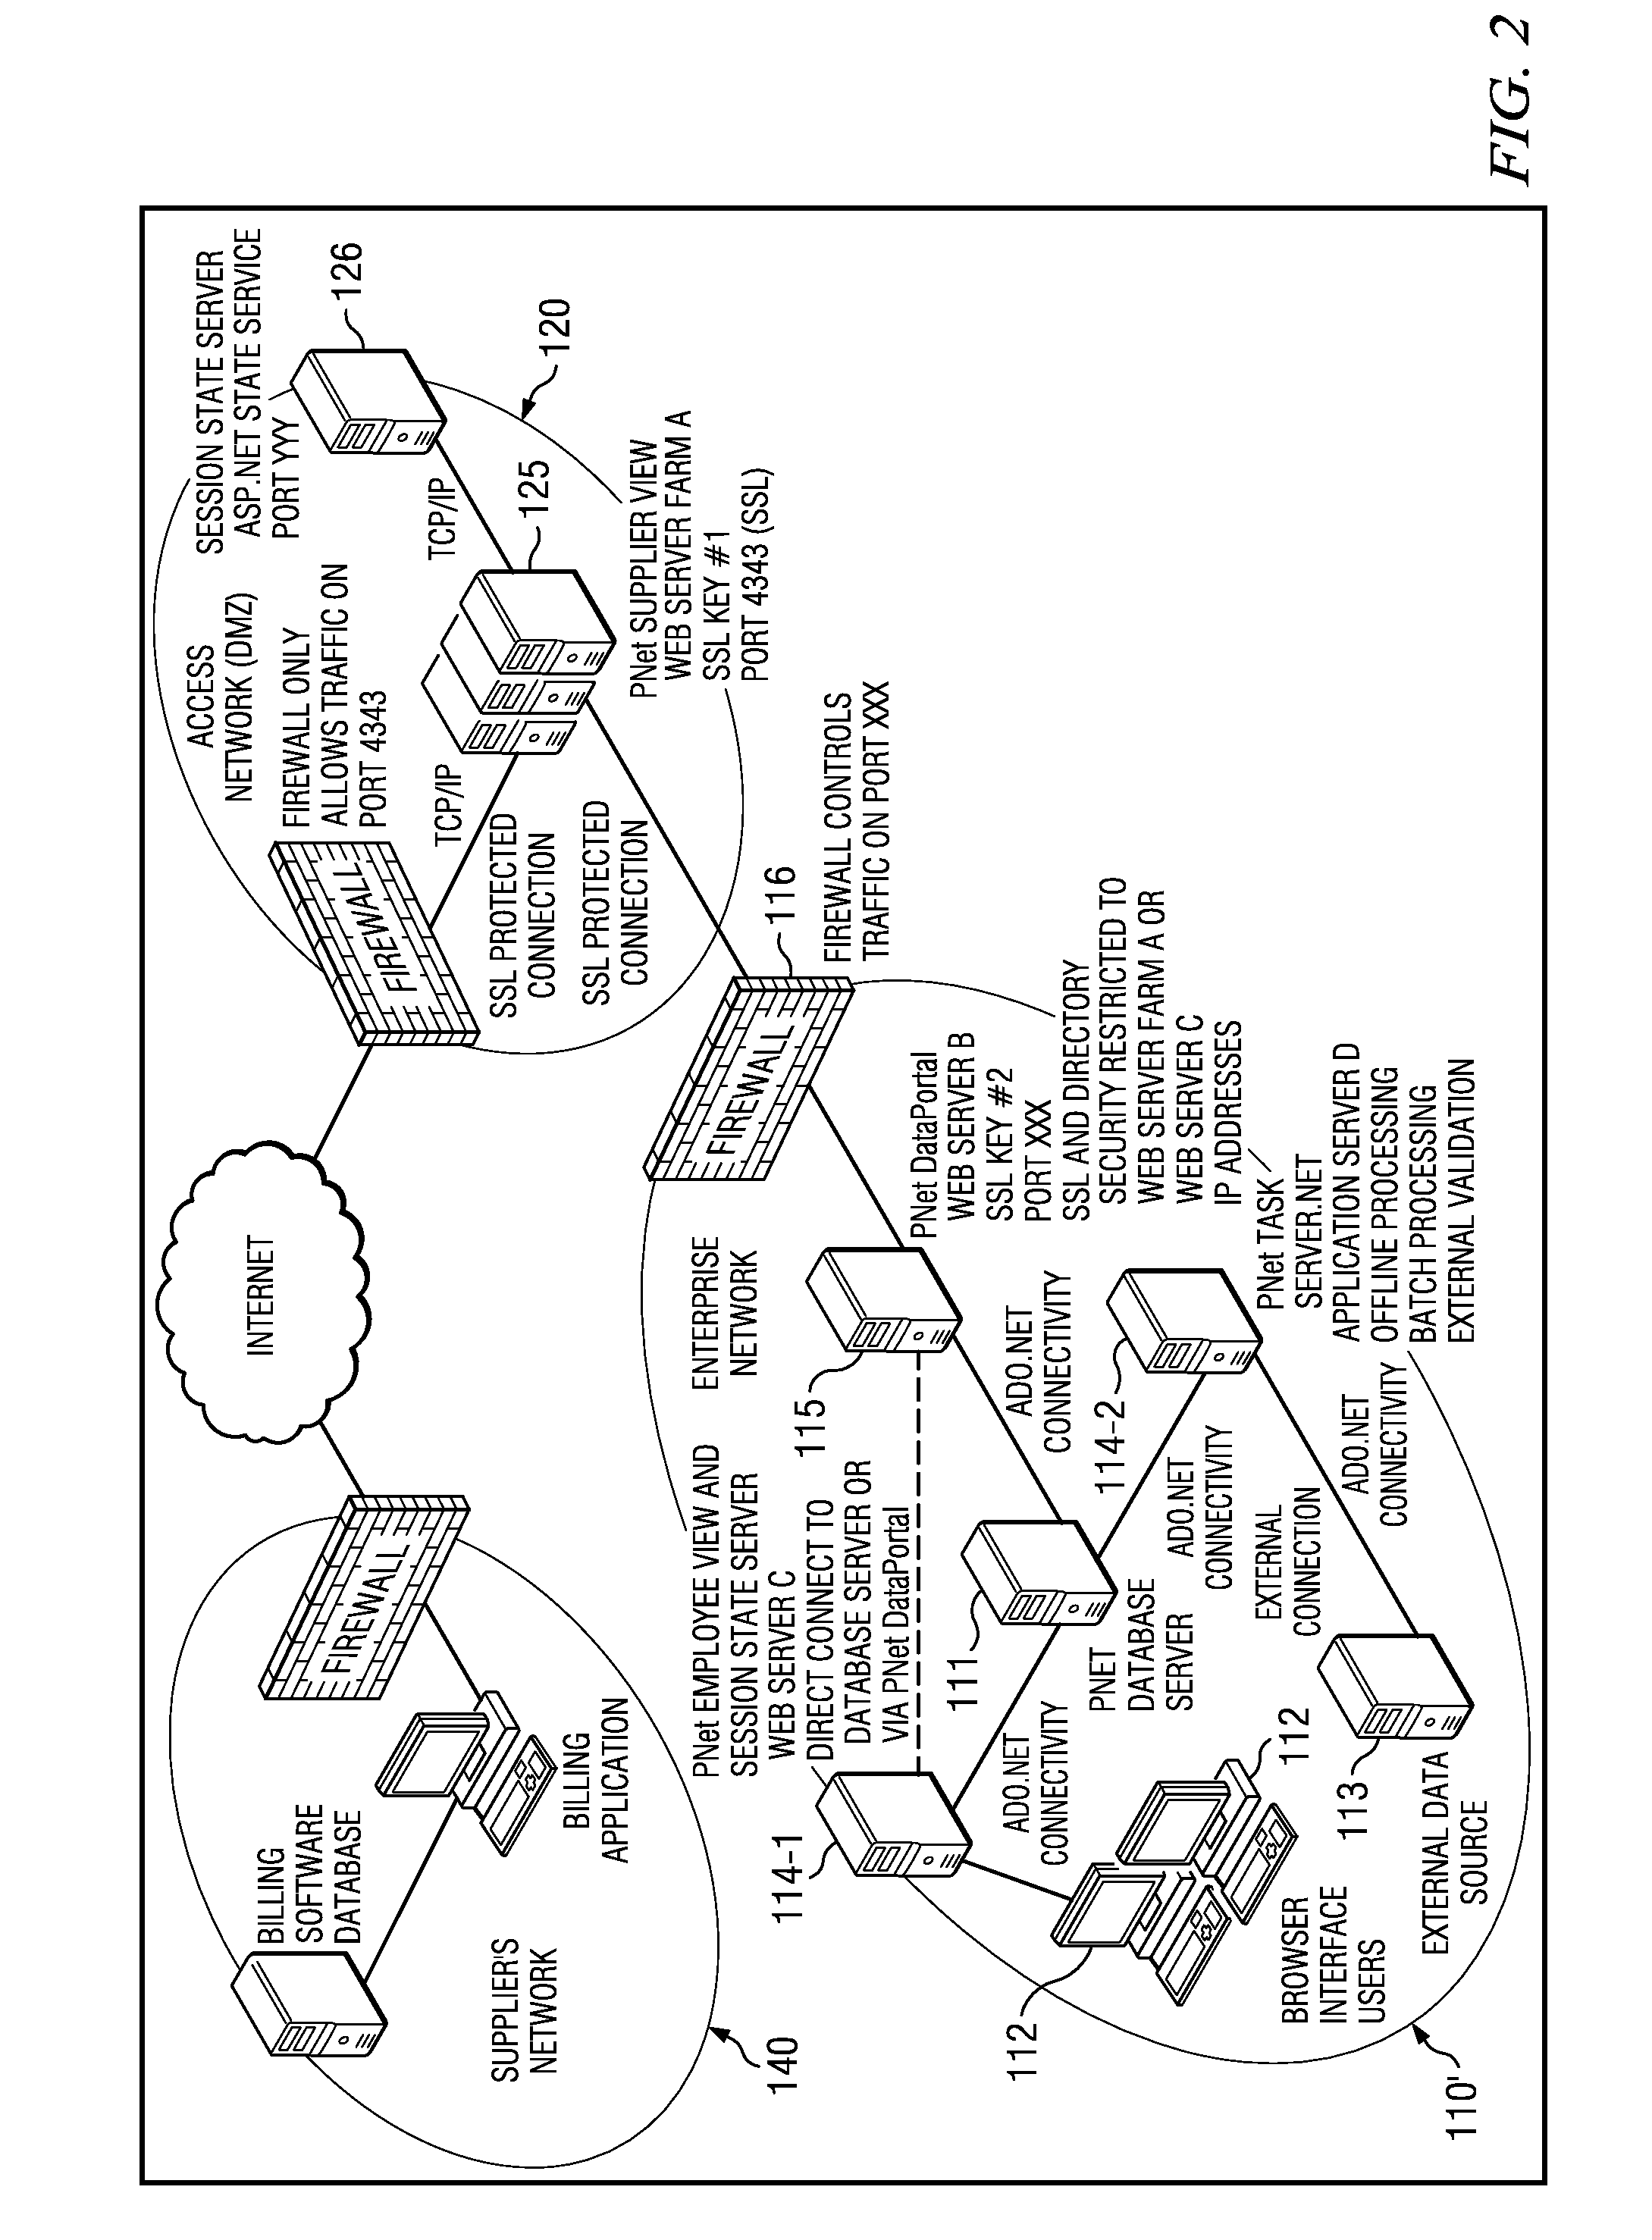 Electronic processing of invoices using assigned users and supplier groups